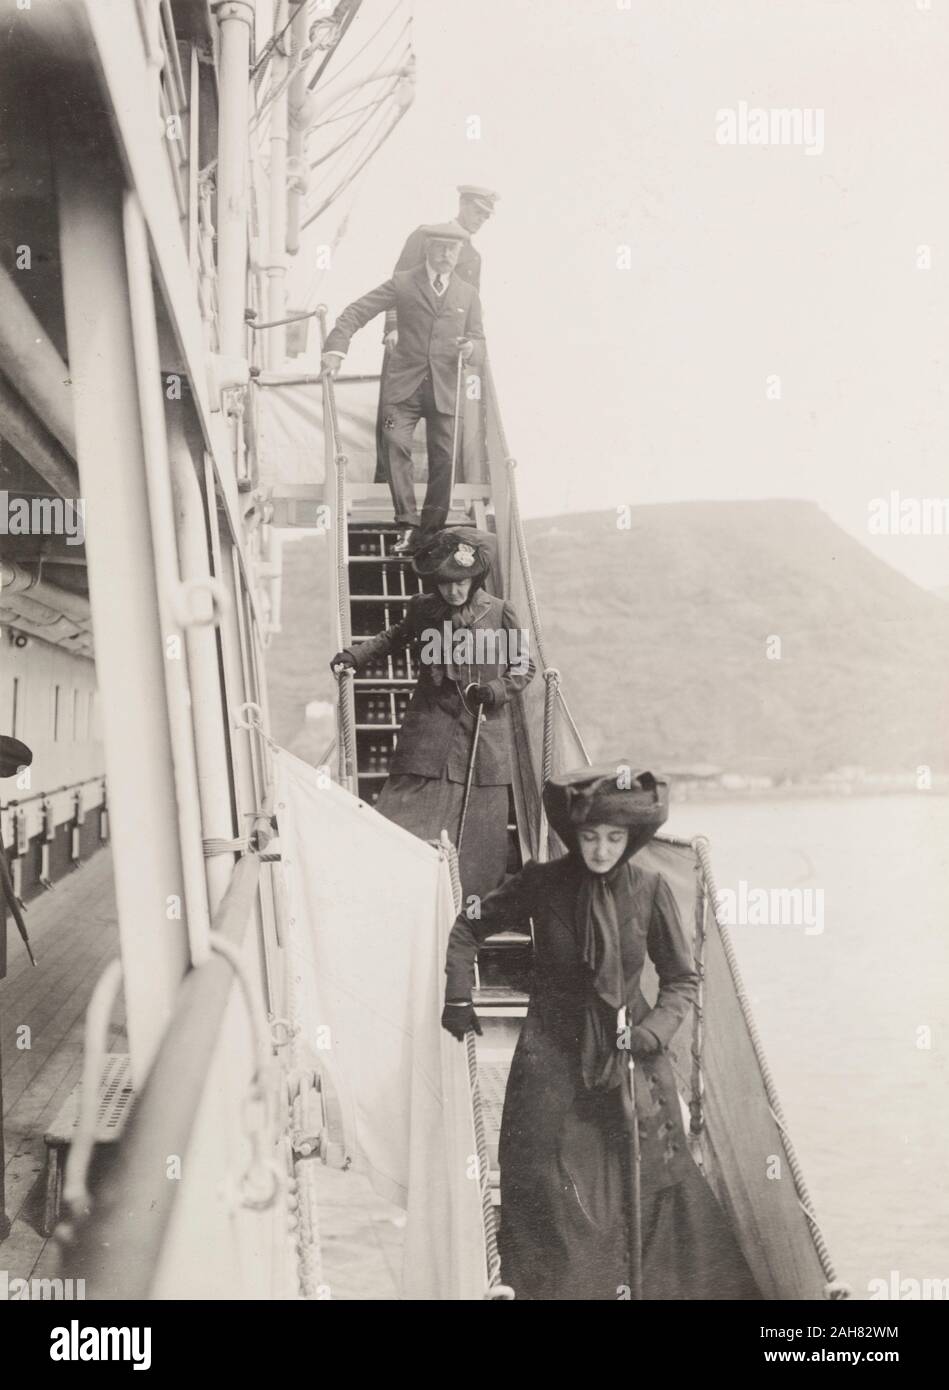 St Helena, The Duke and Duchess of Connaught and their daughter, Princess Patricia, disembark from the S.S. Balmoral Castle on their arrival in St Helena. This was one of several stops made by the royal couple on their way to Cape Town. 25 October 1910.Notes from a printed itinerary of the visit: Monday, October 24. 10 A.M. Saint Helena. Governor's Representative will call.11 A.M. to 12.30 P.M. Land and receive Address, Visit to Castle, Lace School and Hospital.Lunch on board (private)2.15 P.M. to 6 P.M. Visit to Longwood.Dinner, 'Balmoral Castle', 1910. 1995/076/1/4/1/15. Stock Photo